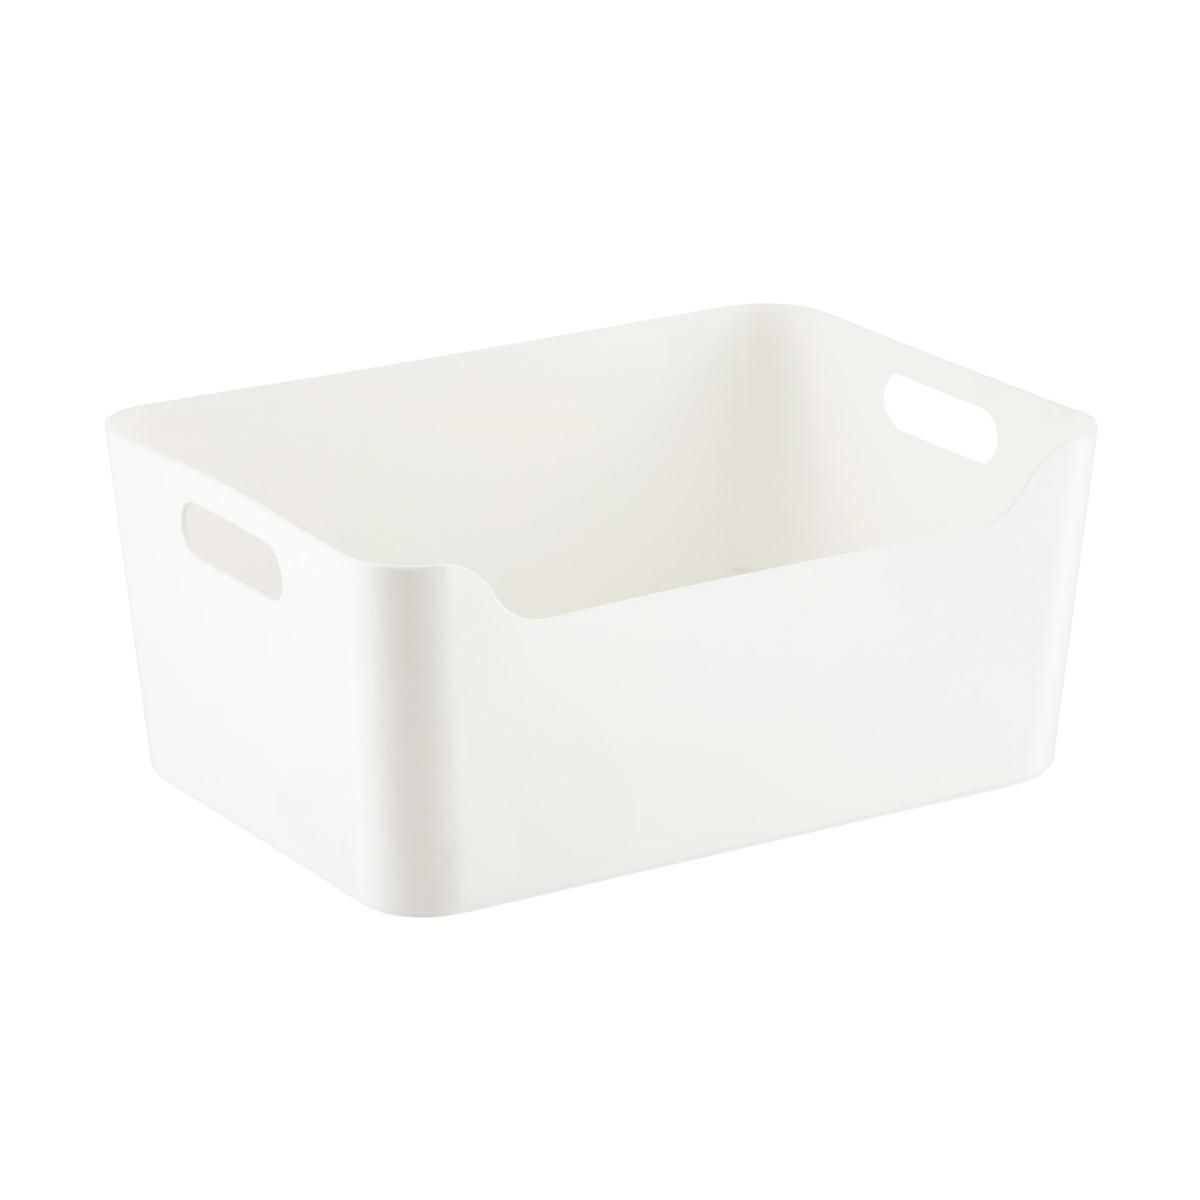 White Plastic Storage Bins with Handles | The Container Store